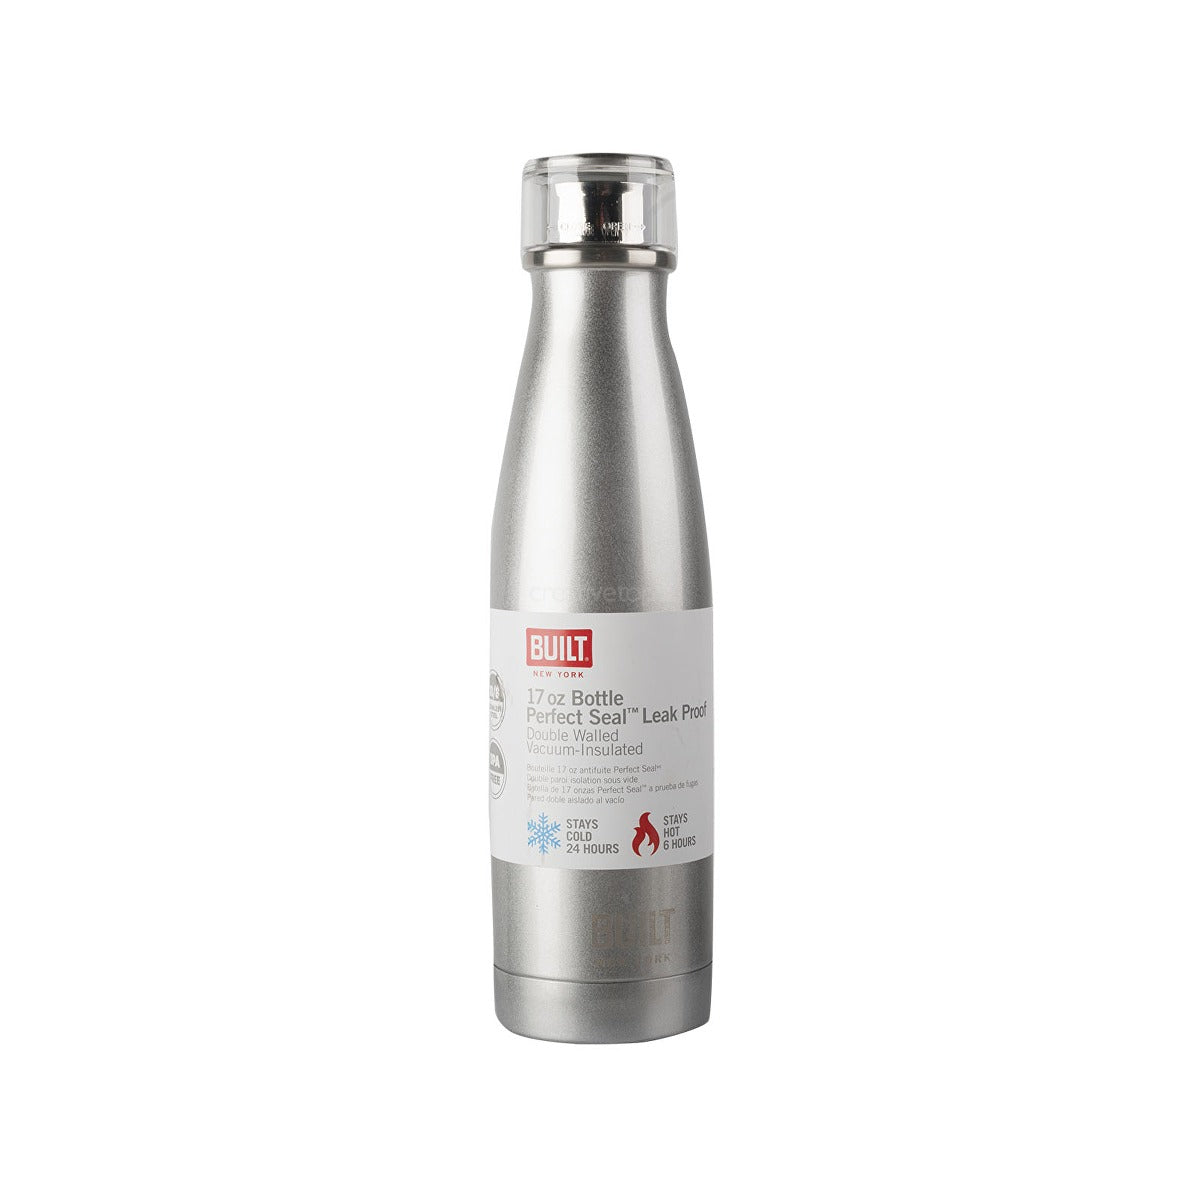 Built Perfect Seal Leakproof Insulated Bottle Metallic 500ml